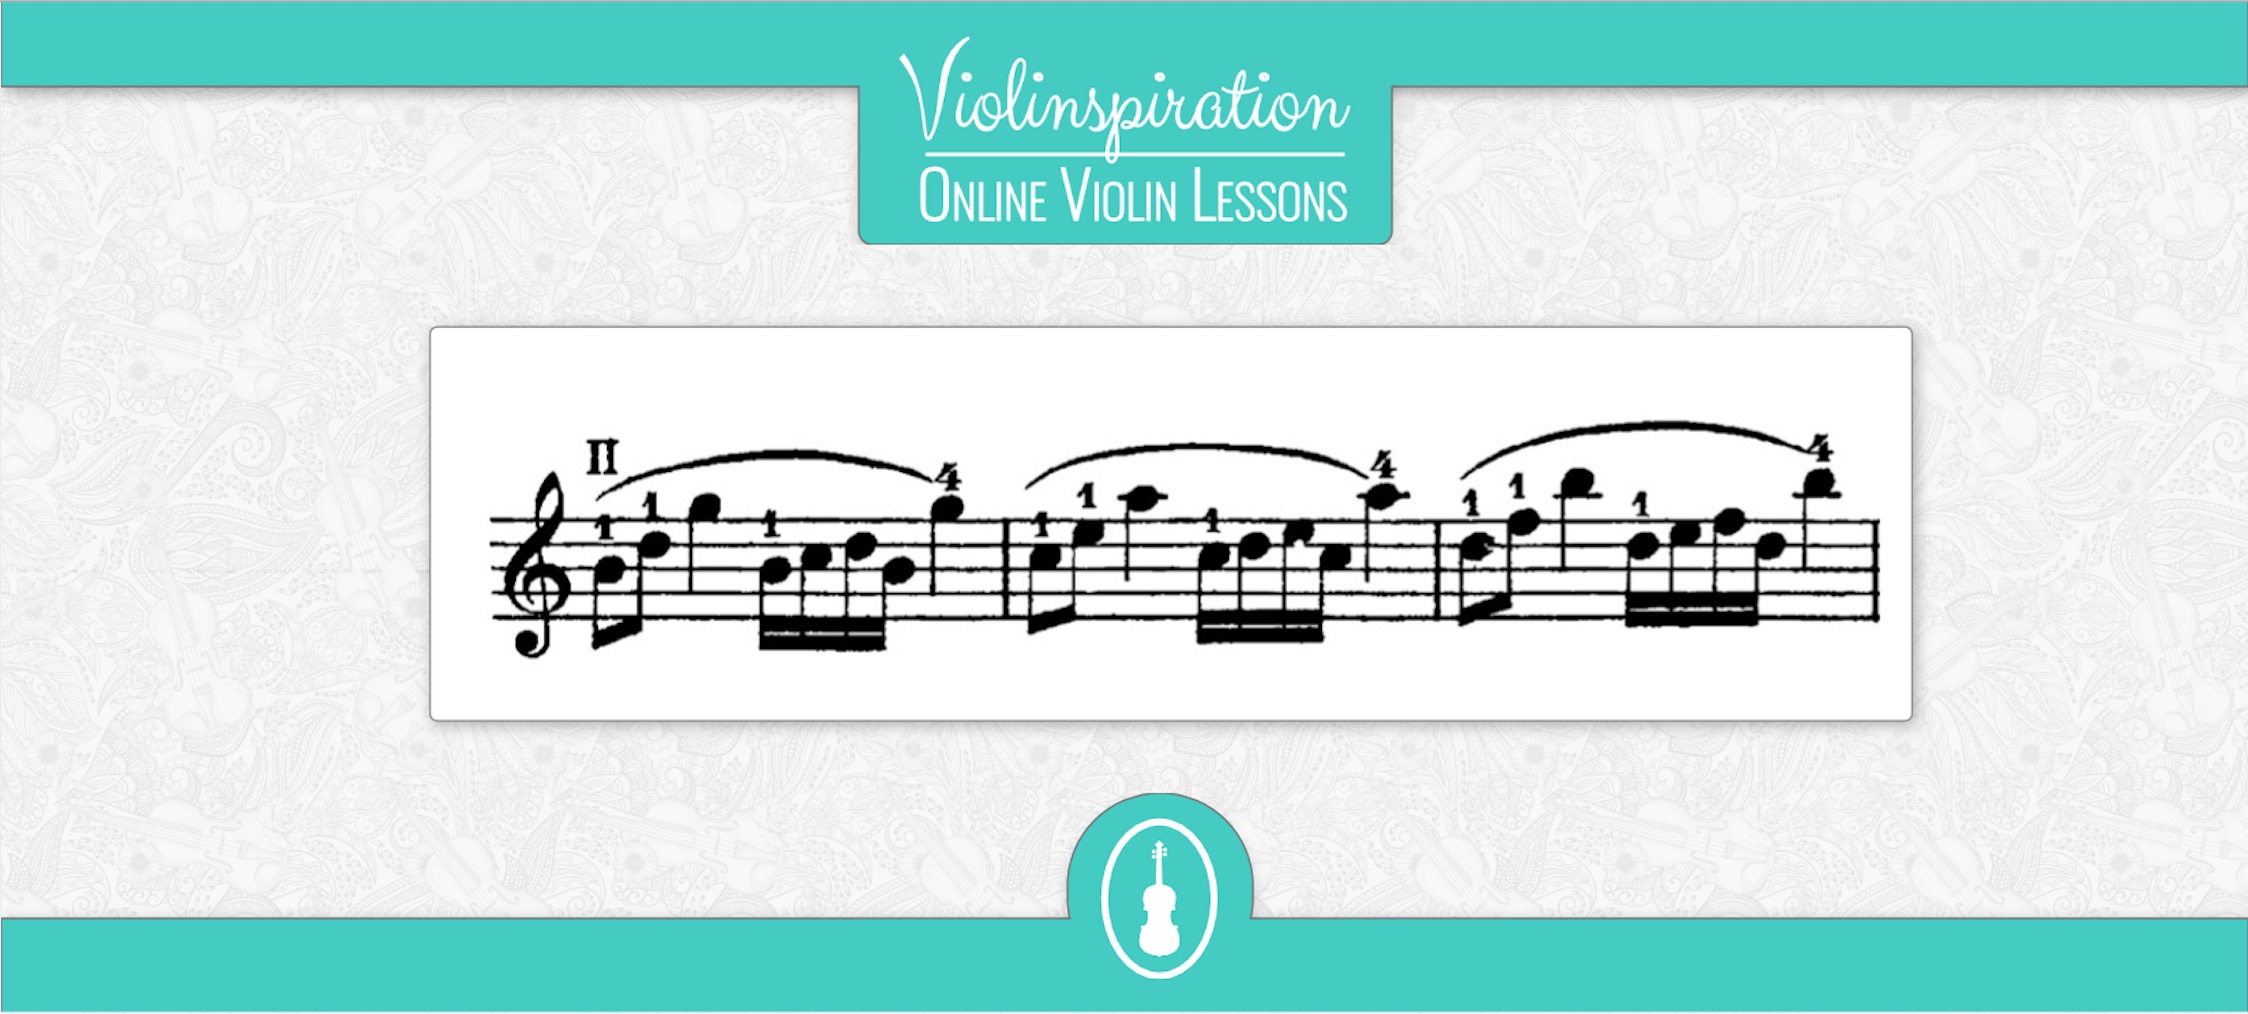 Violin Positions Exercise